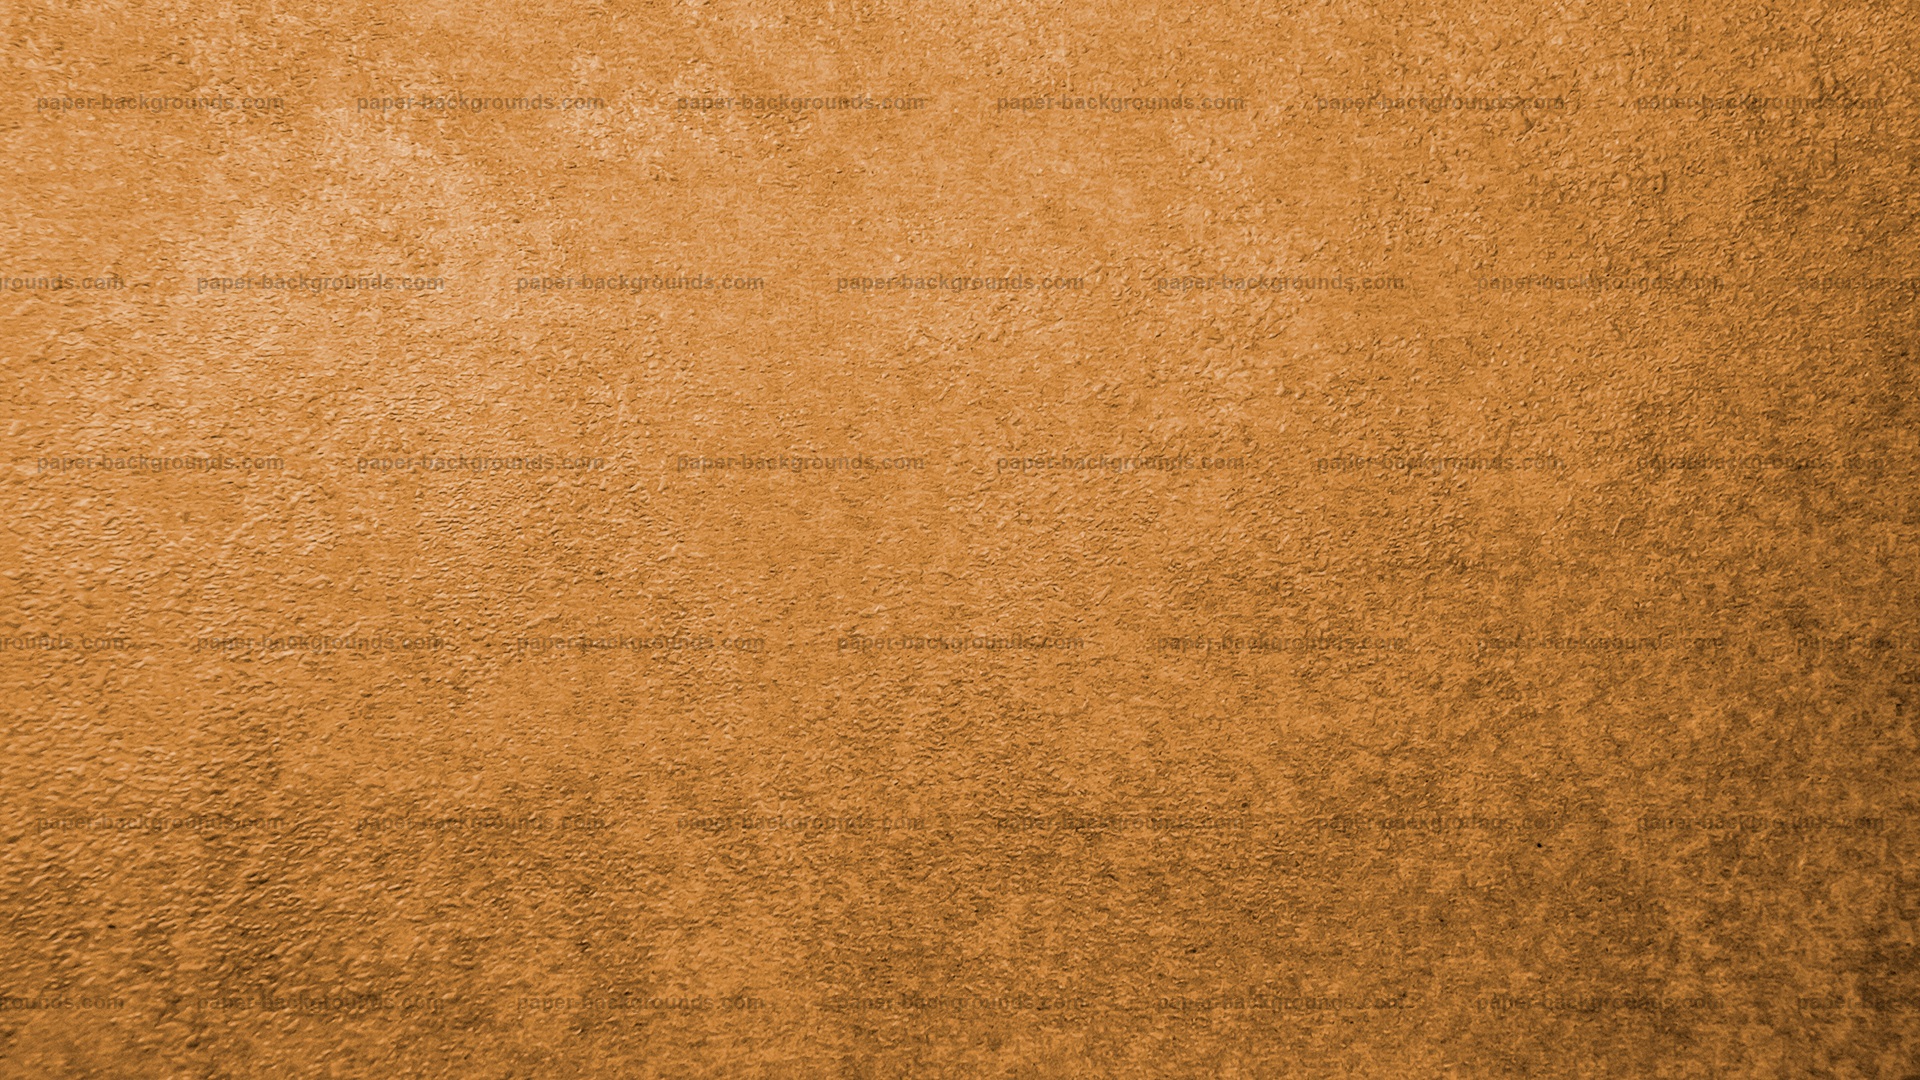 Paper Backgrounds | mottled | Royalty Free HD Paper Backgrounds